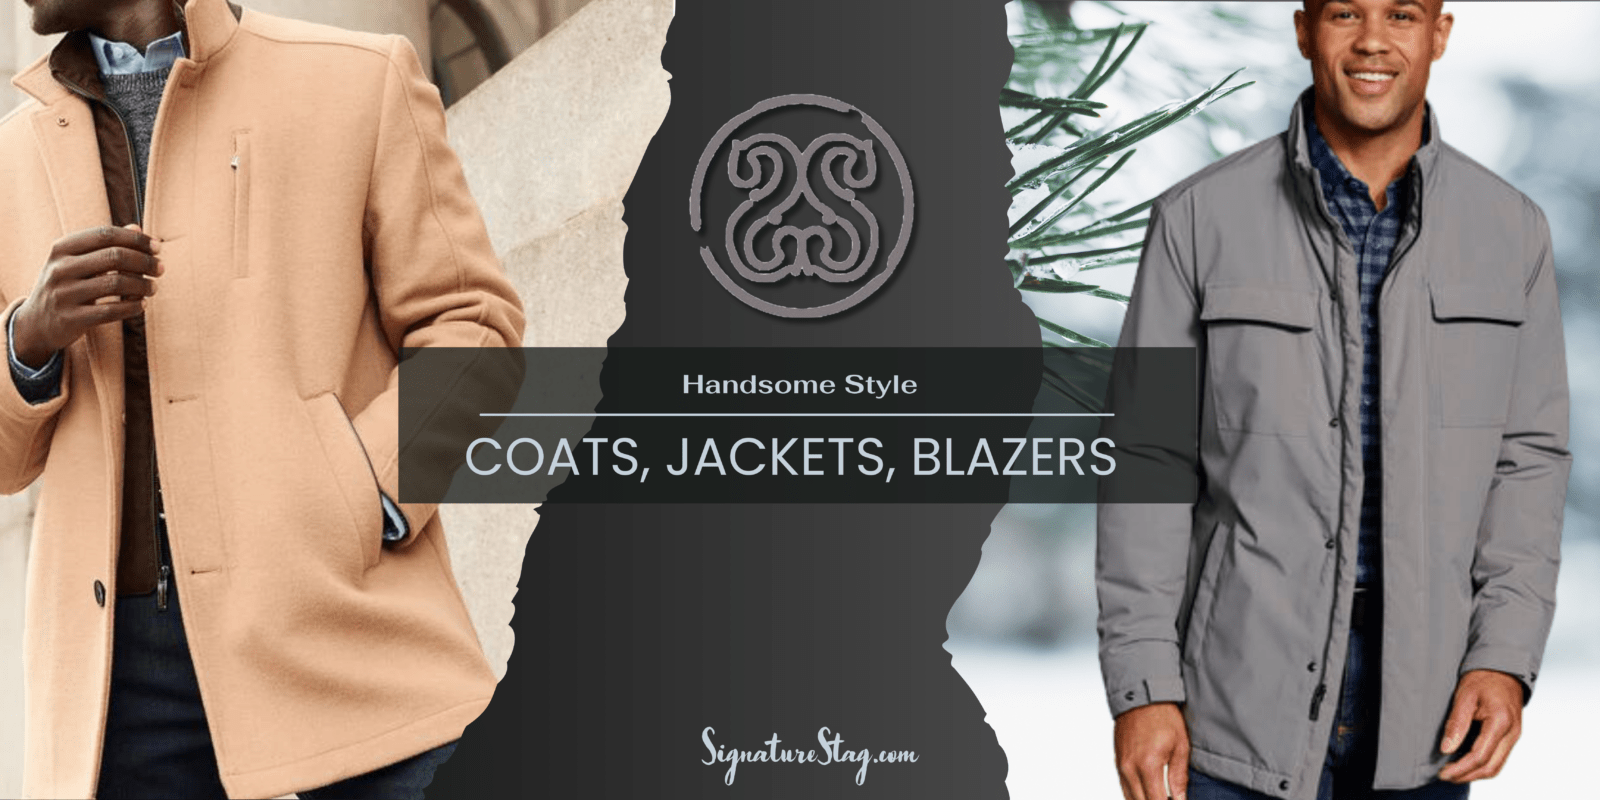 Coats Jackets Blazers for Men in Lubbock and Midland TX Clothing Stores. Filson, Johnston & Murphy, GenTeal, GoodMan Brand Clothing.